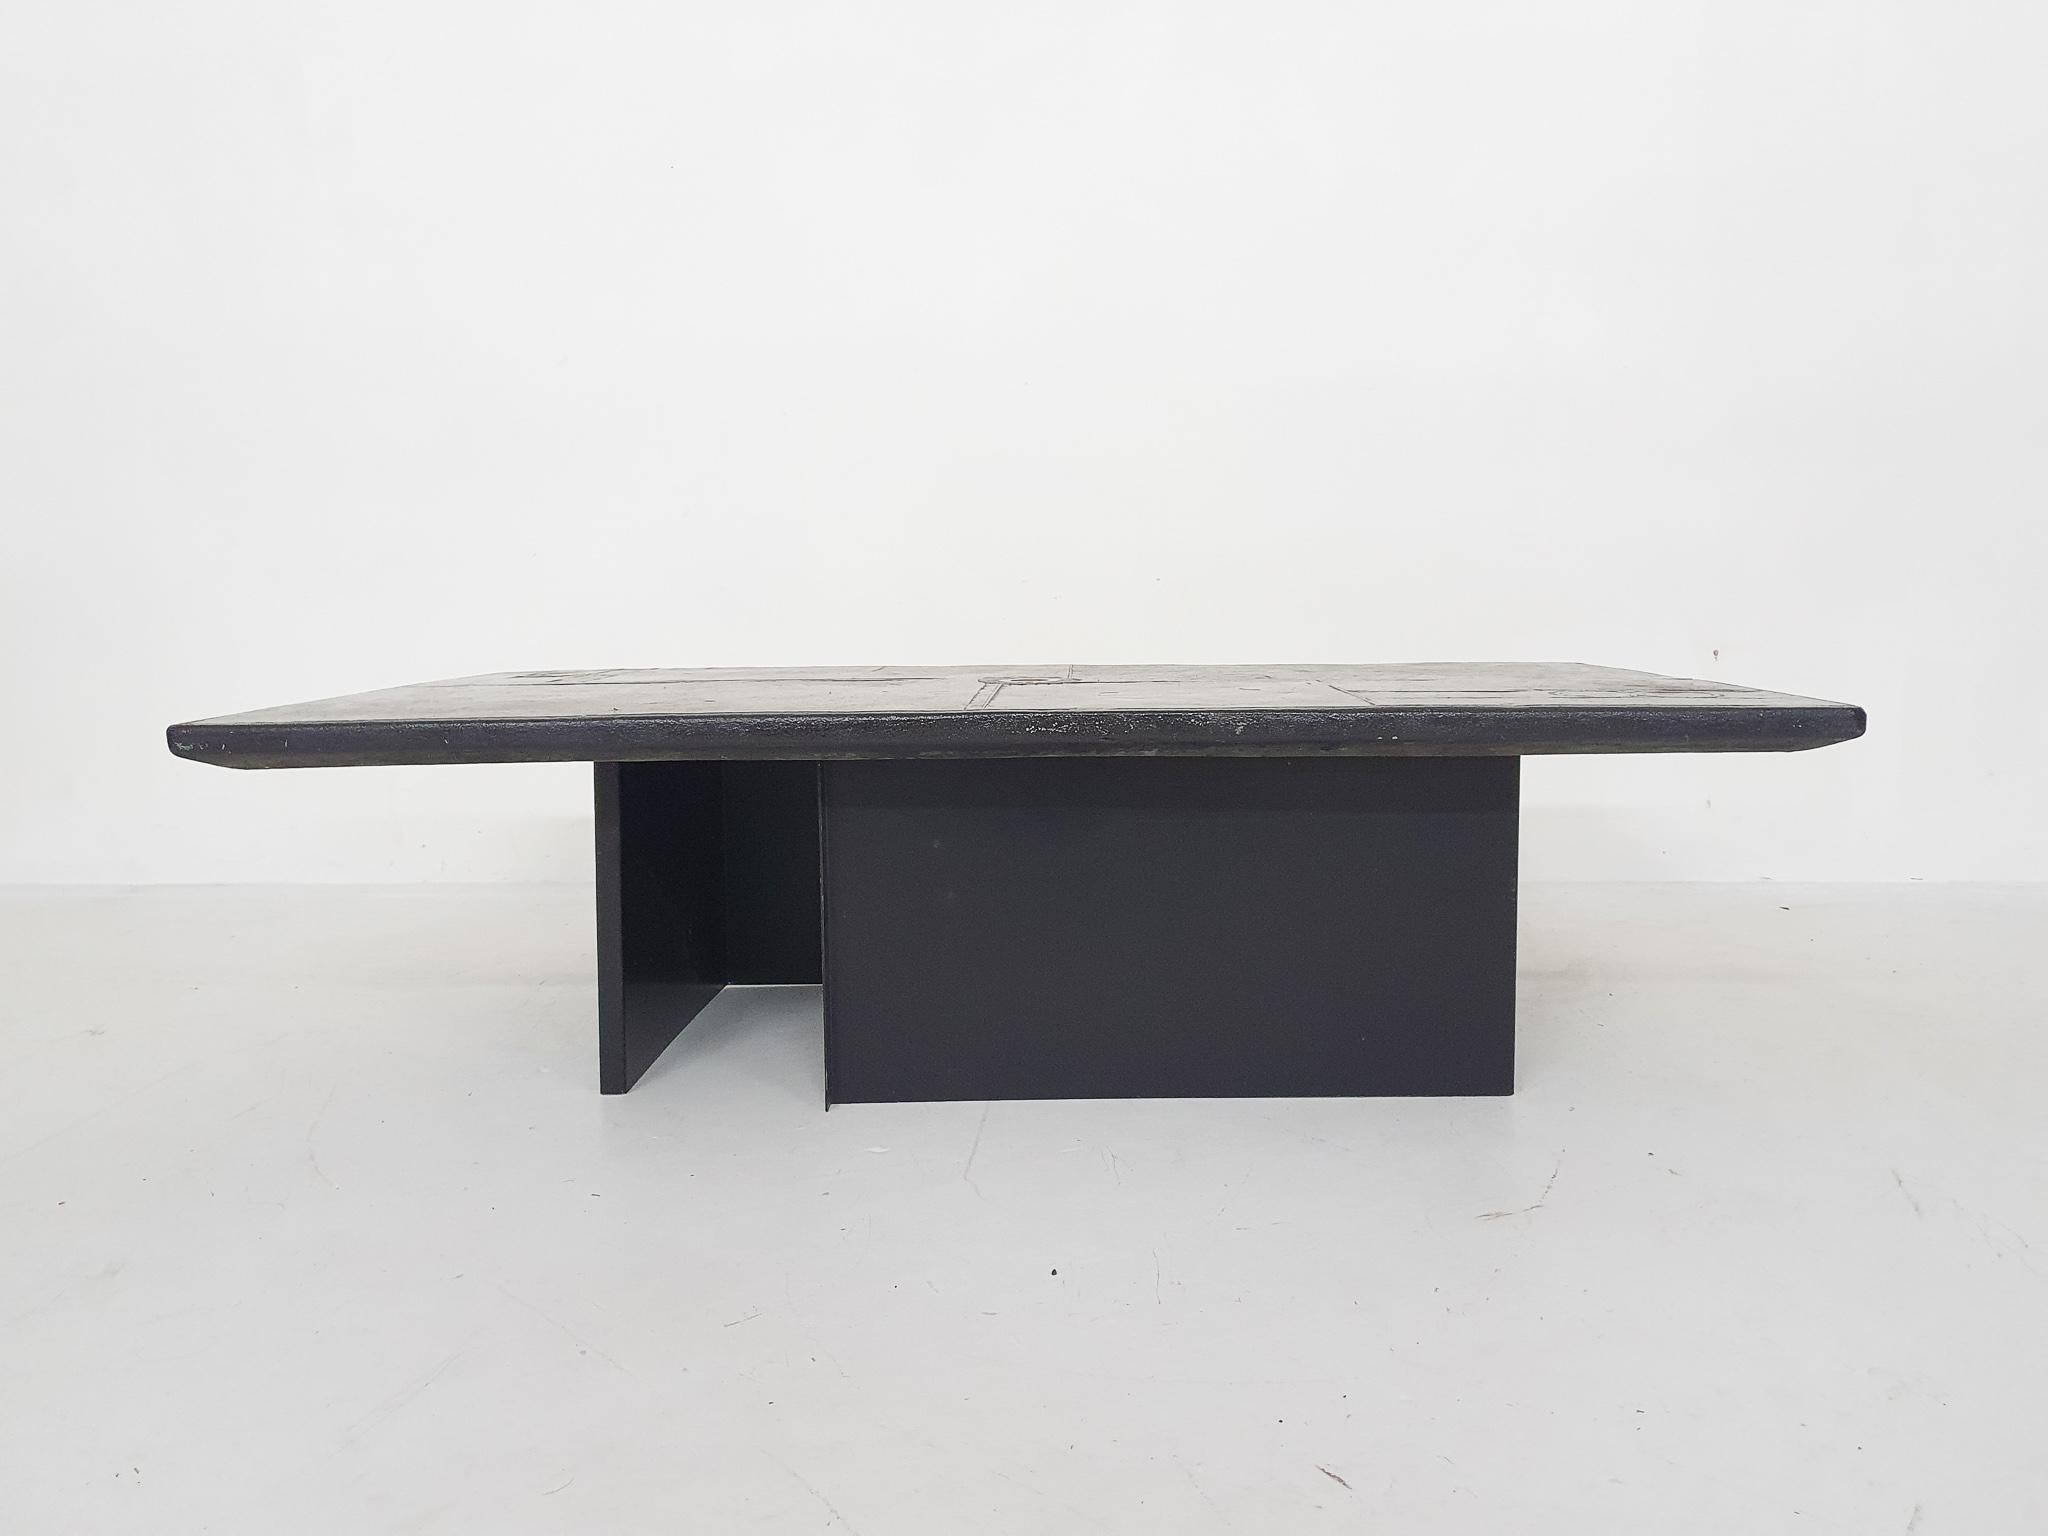 Metal Kingma Attrb. Stone Coffee Table, The Netherlands, 1970's